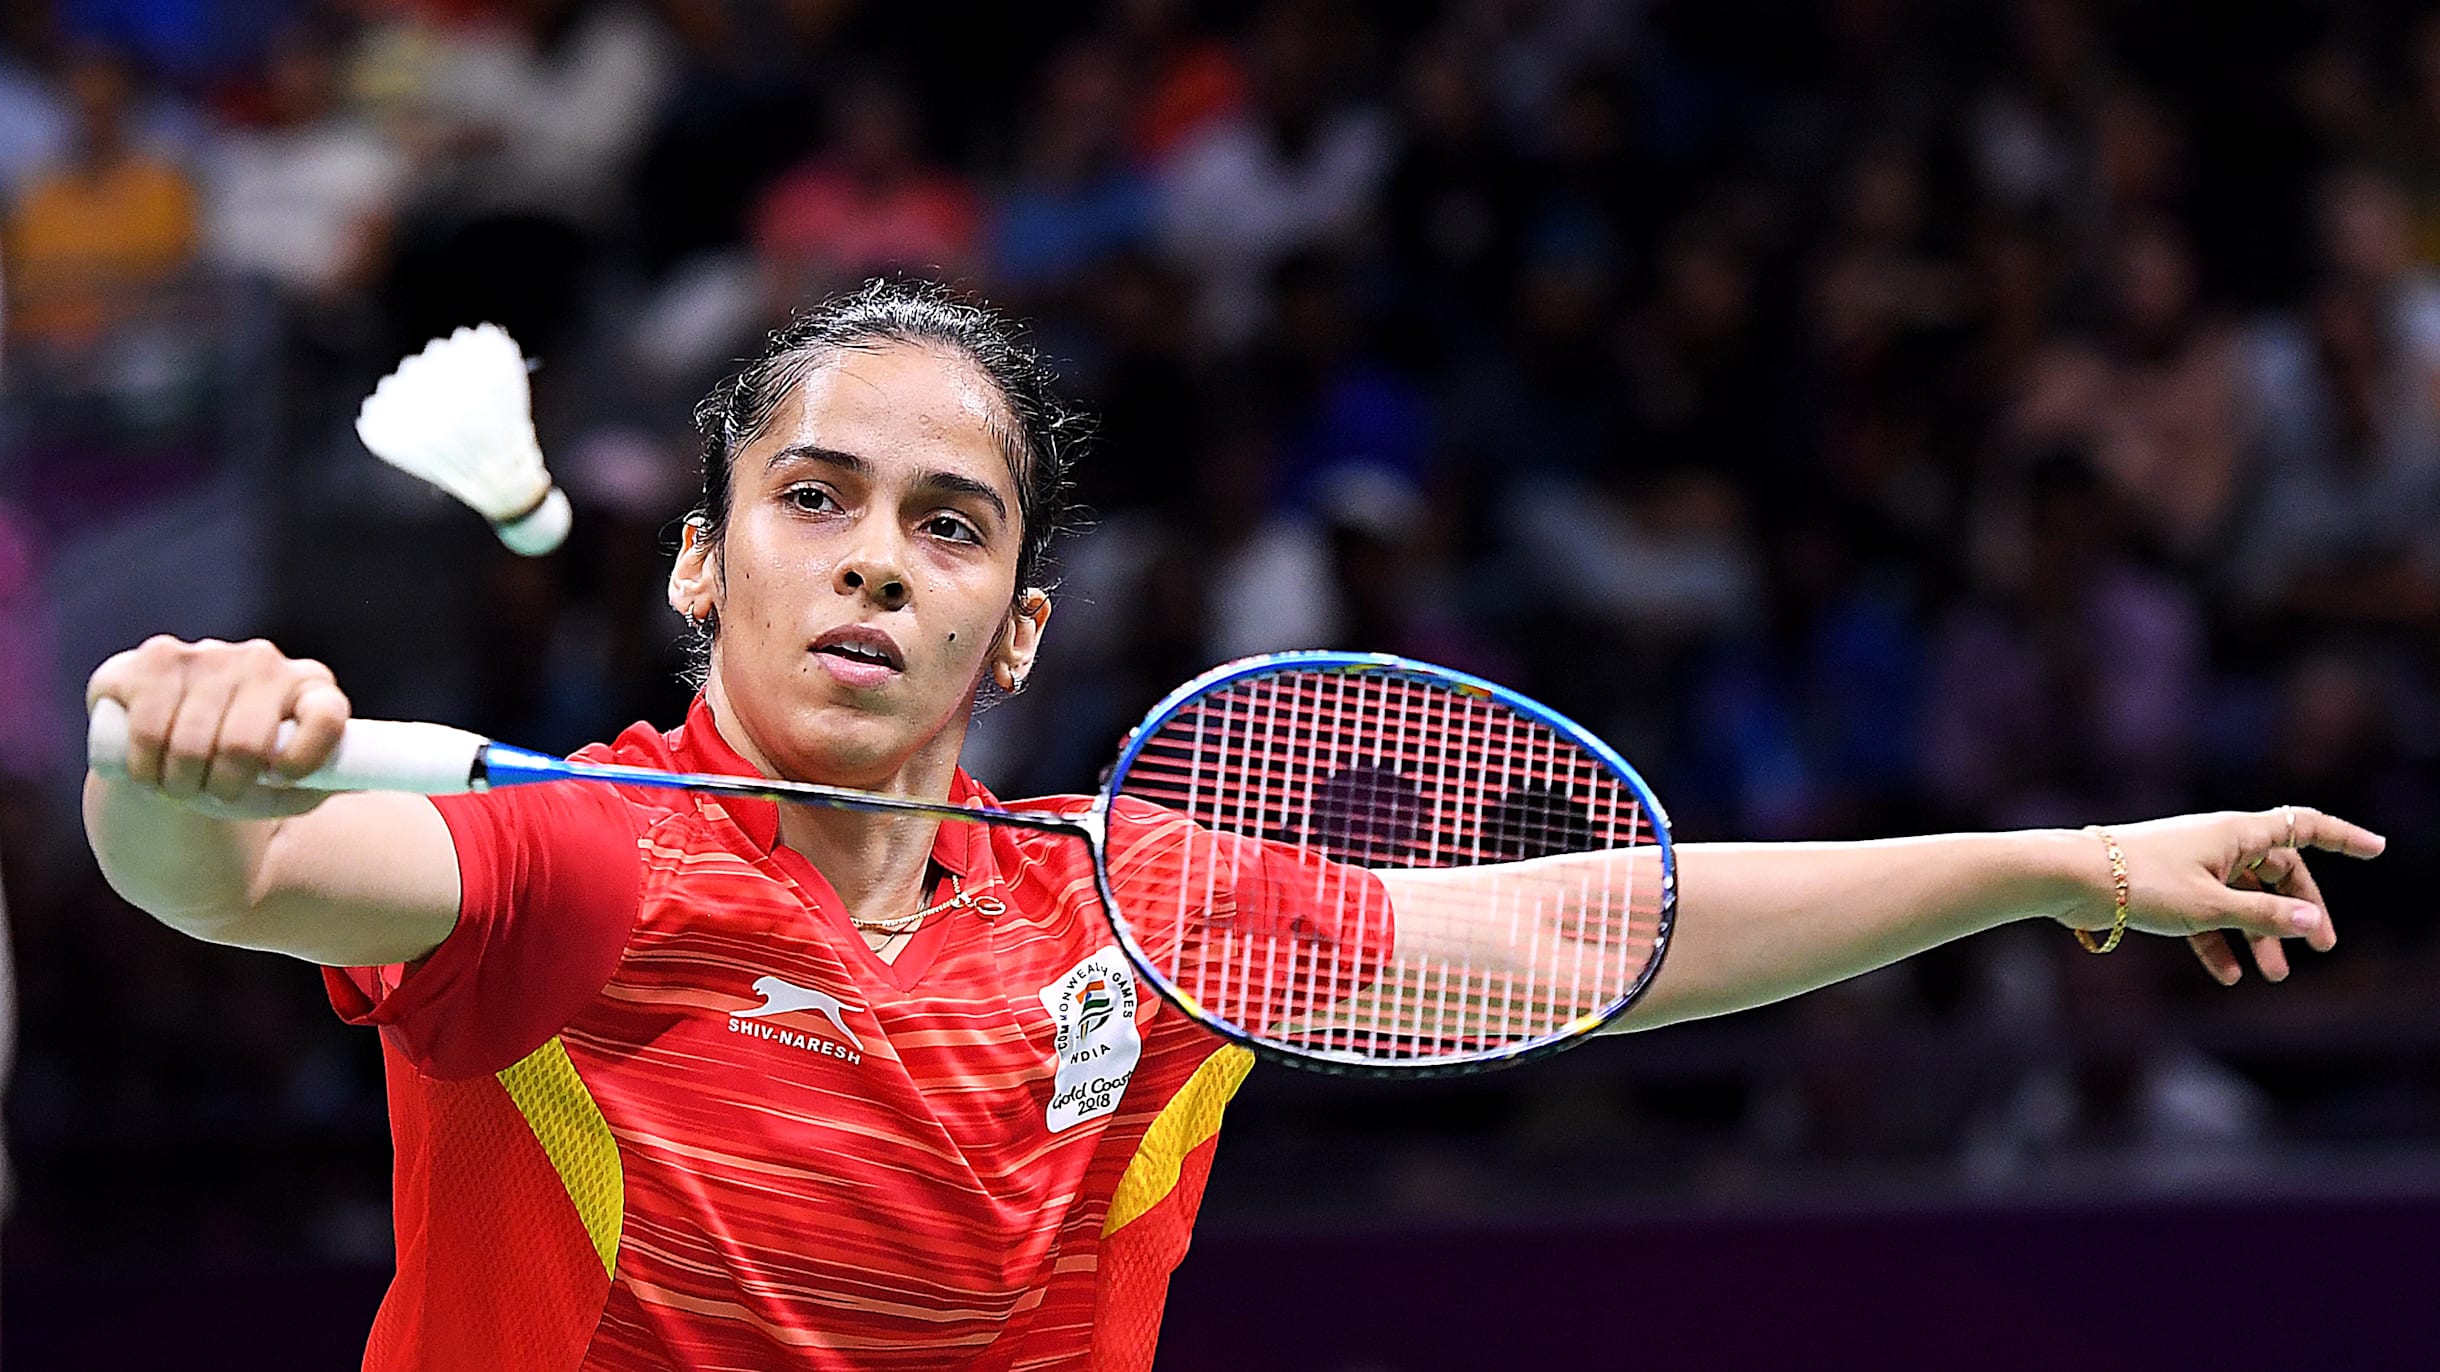 Thomas and Uber Cup 2020 Know schedule, and watch live streaming and telecast in India